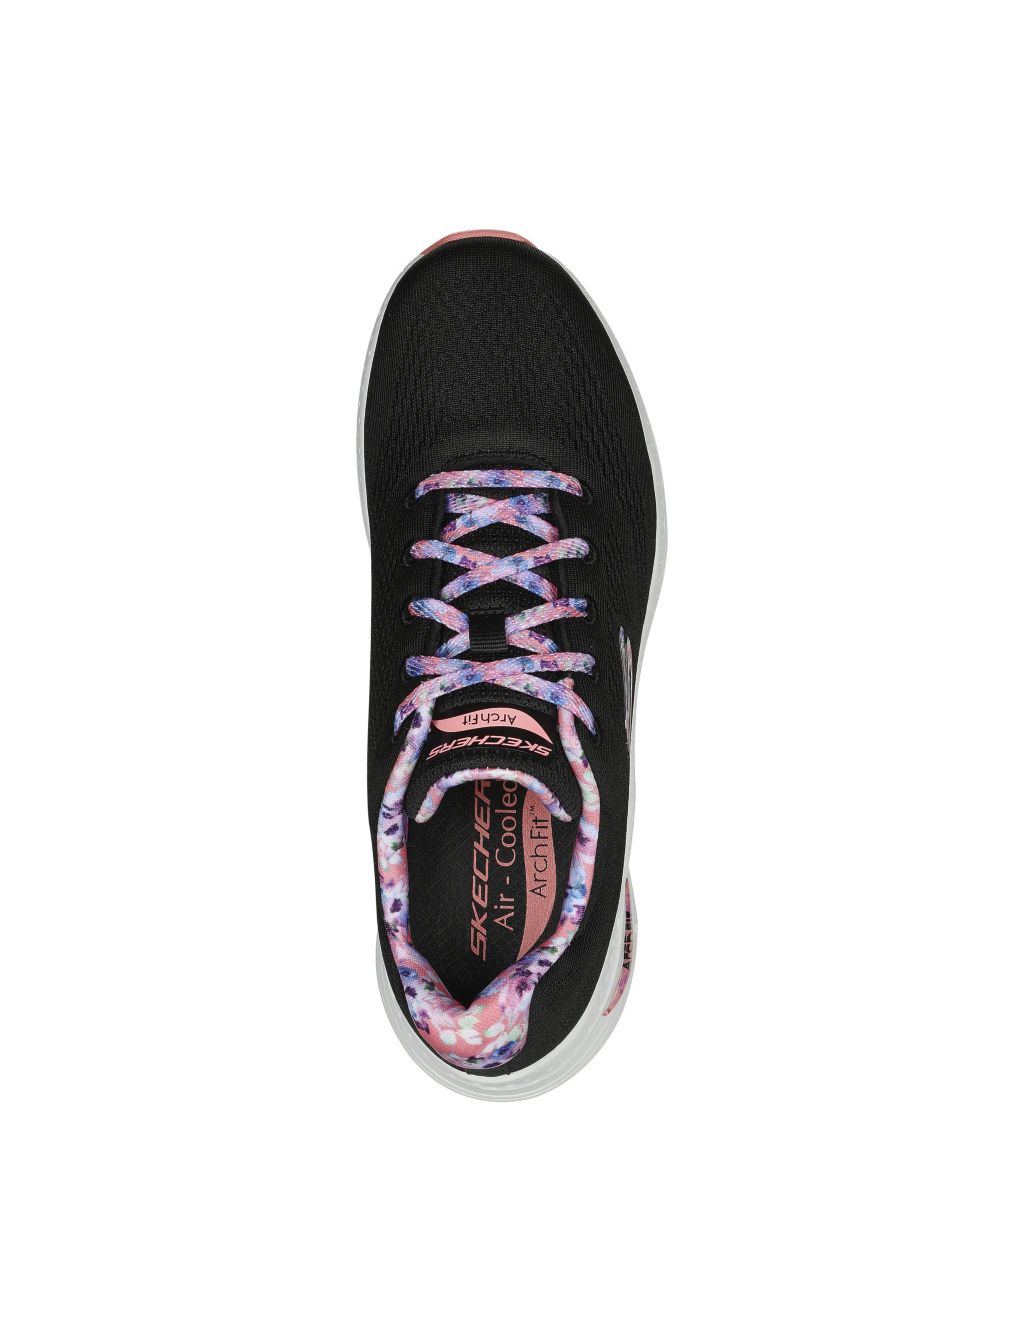 Arch Fit First Blossom Lace Up Trainers image 3